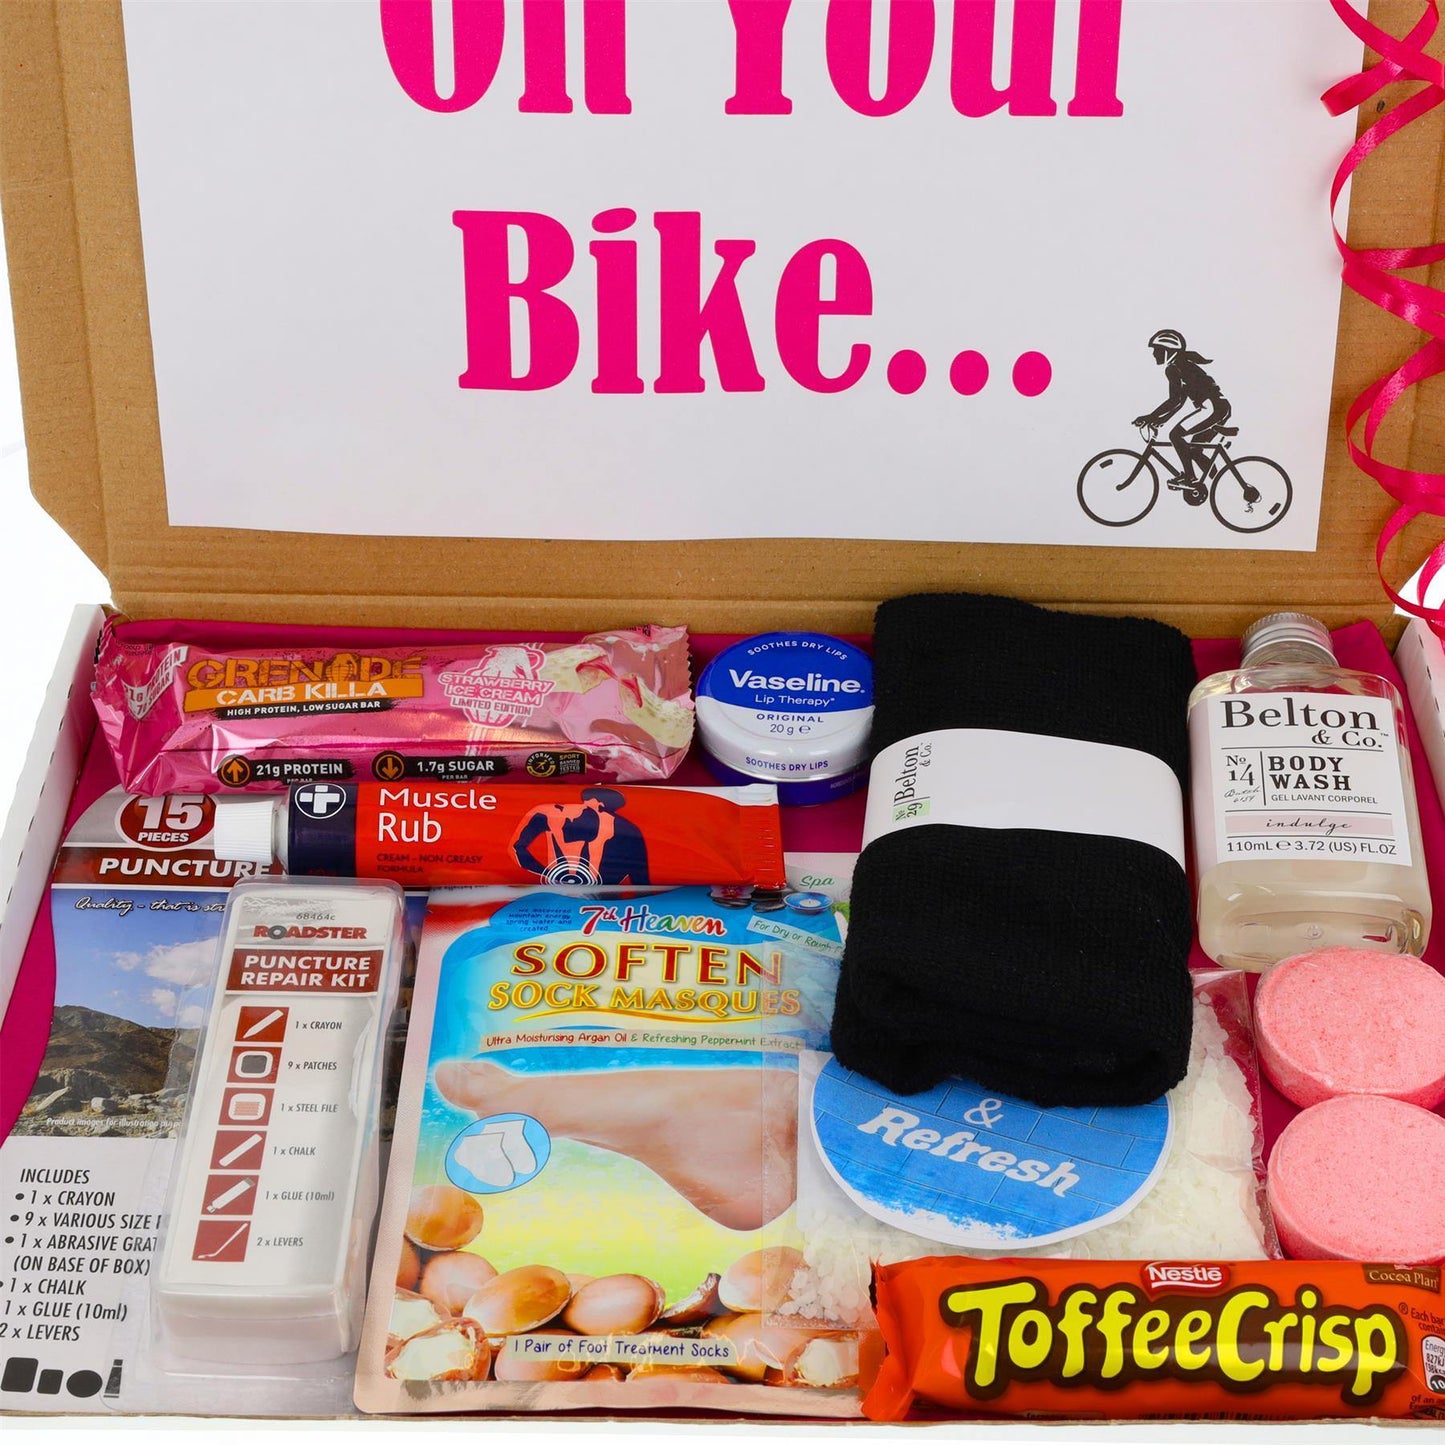 Cycling Lover Cycle Letterbox Gift | Bike Accessories Kit | Fitness & Cyclist  - Always Looking Good -   